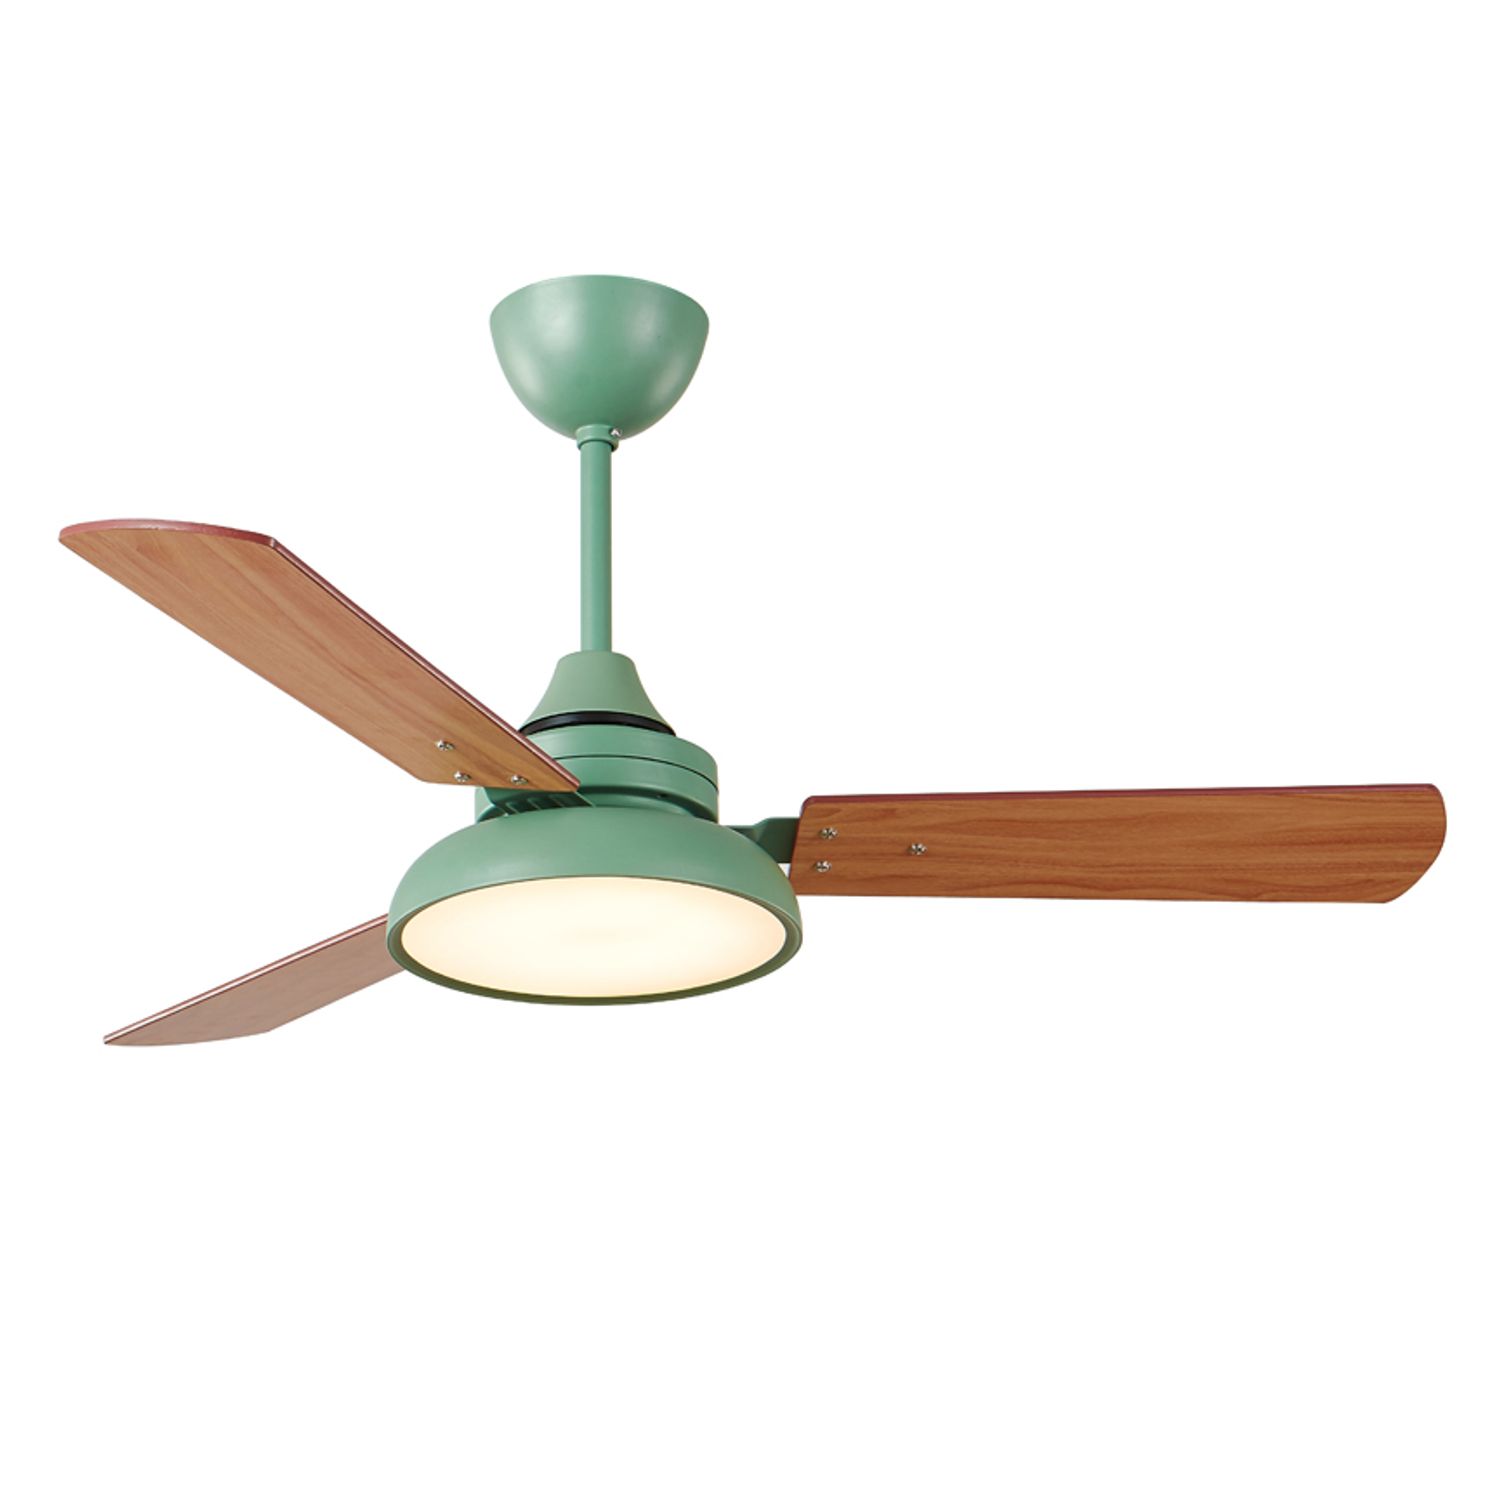 KBS Green and plywood blade contemporary ceiling fan with led light